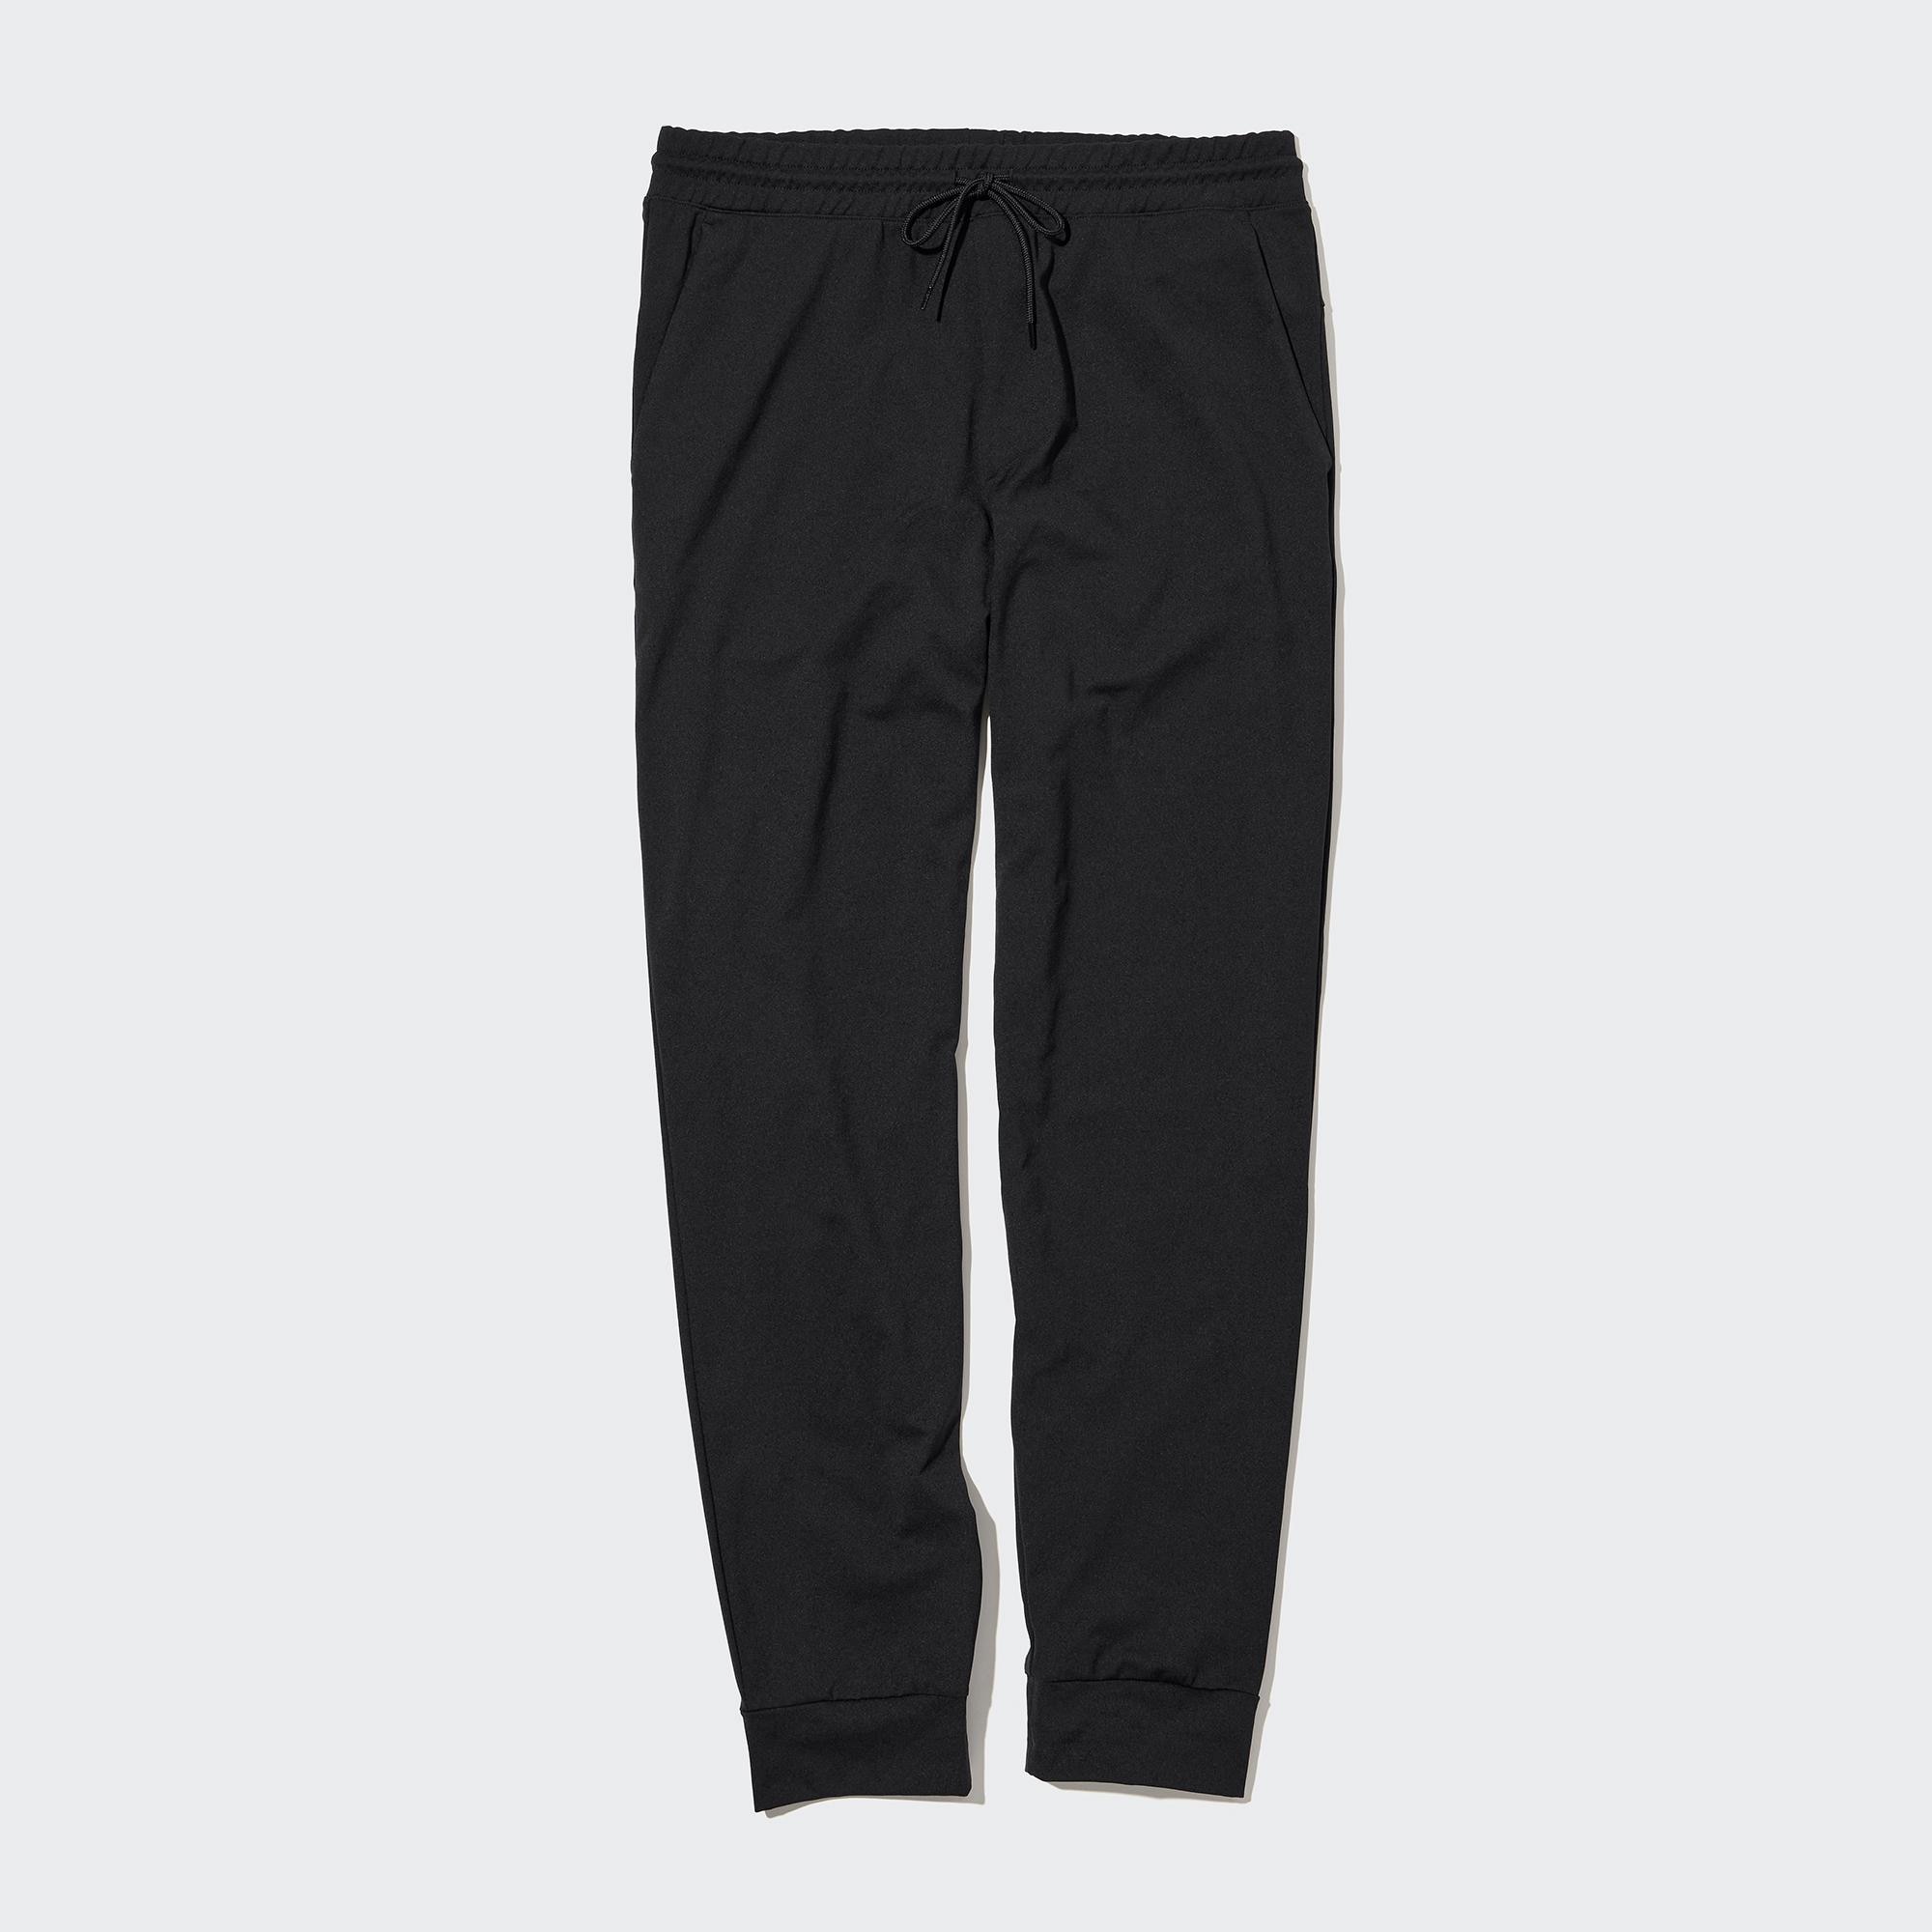 Smart Ankle Pants (Ultra Stretch), UNIQLO US